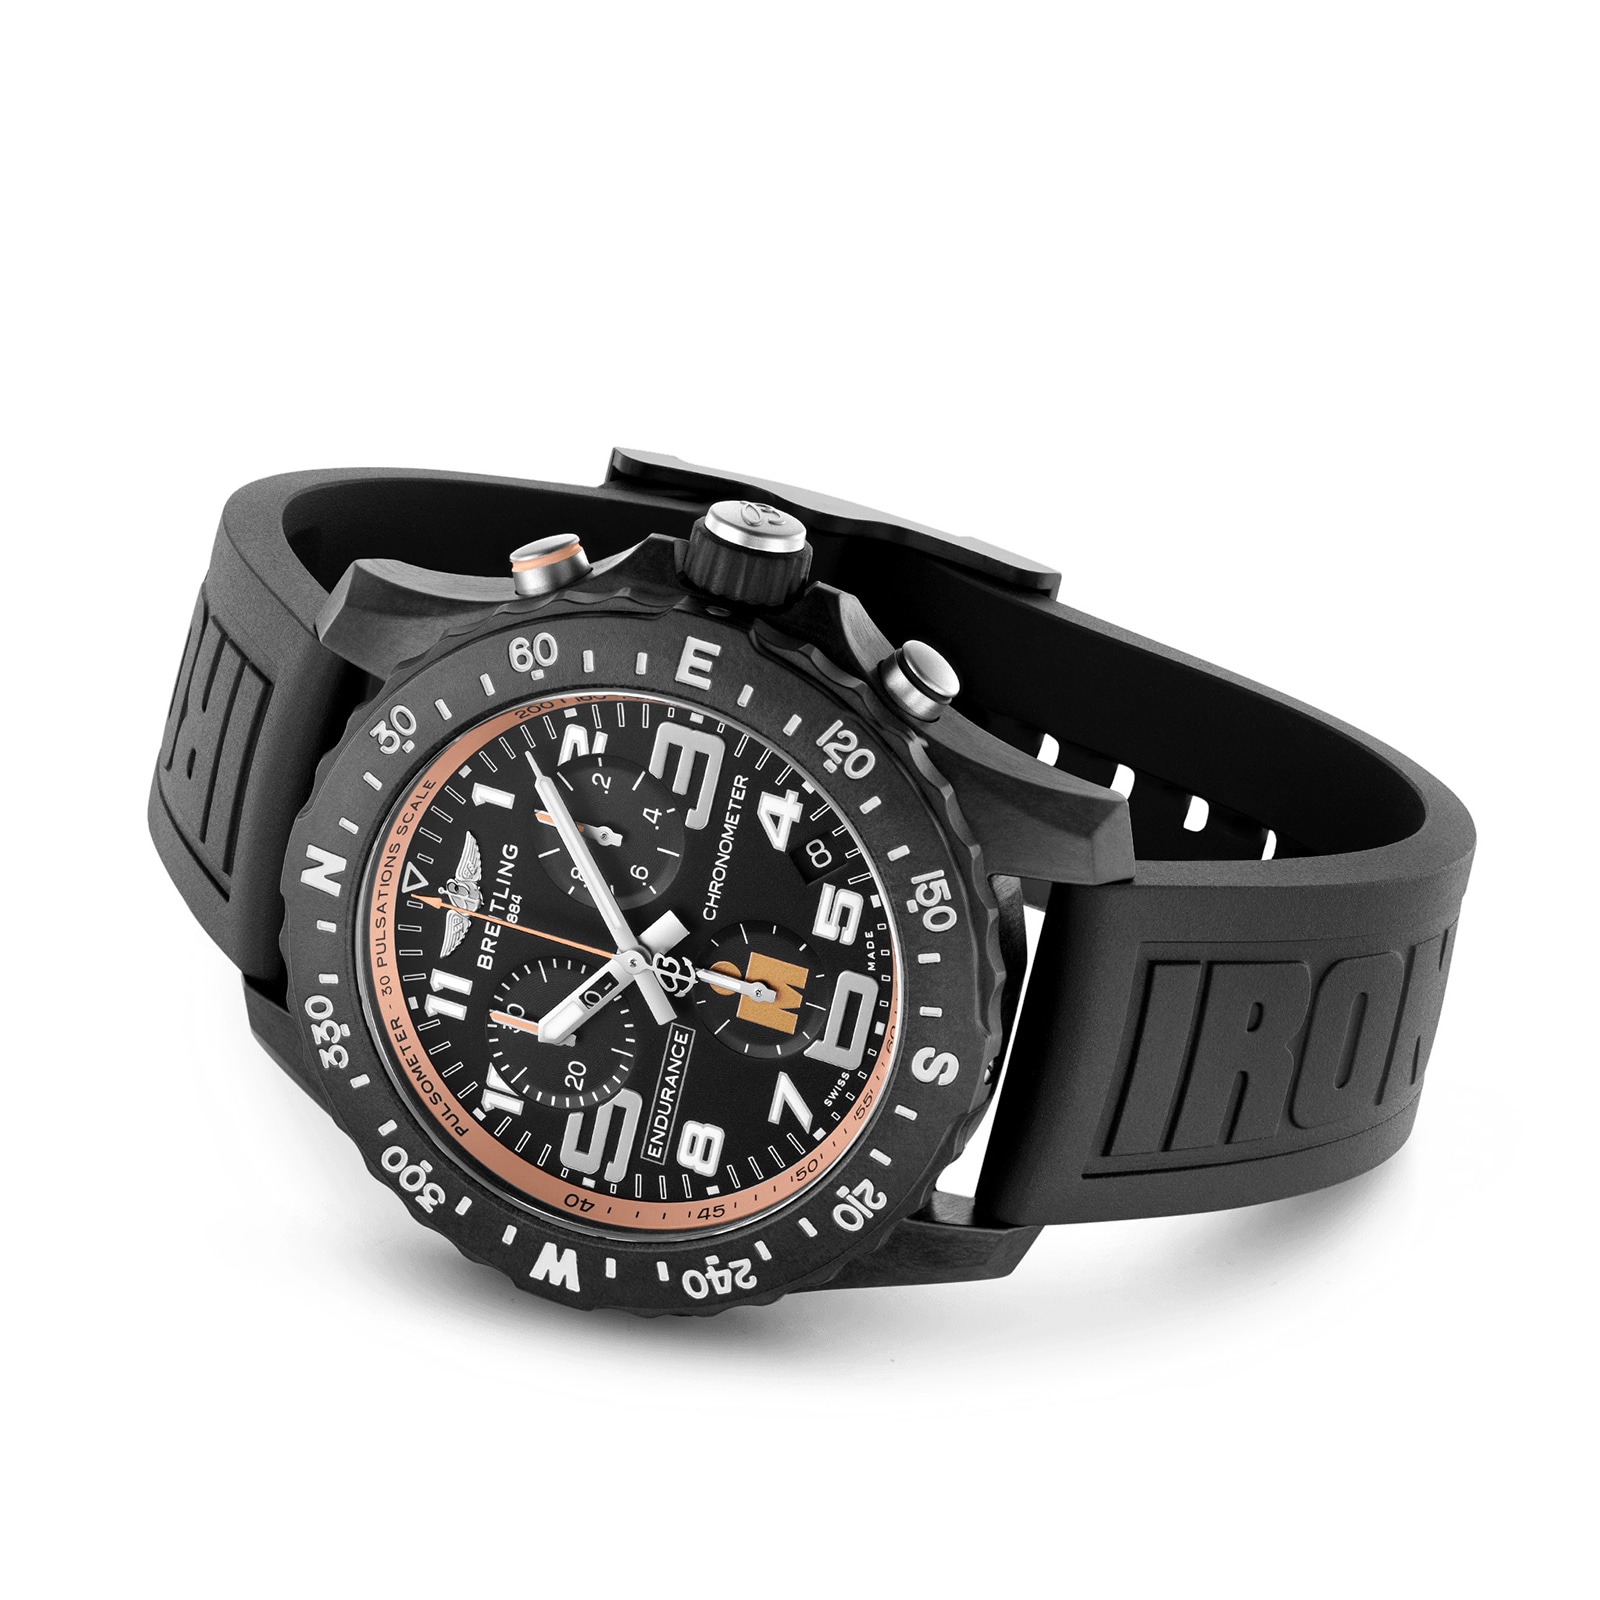 Breitling Endurance Pro Ironman Watches Celebrate the Famed Triathlon –  Robb Report